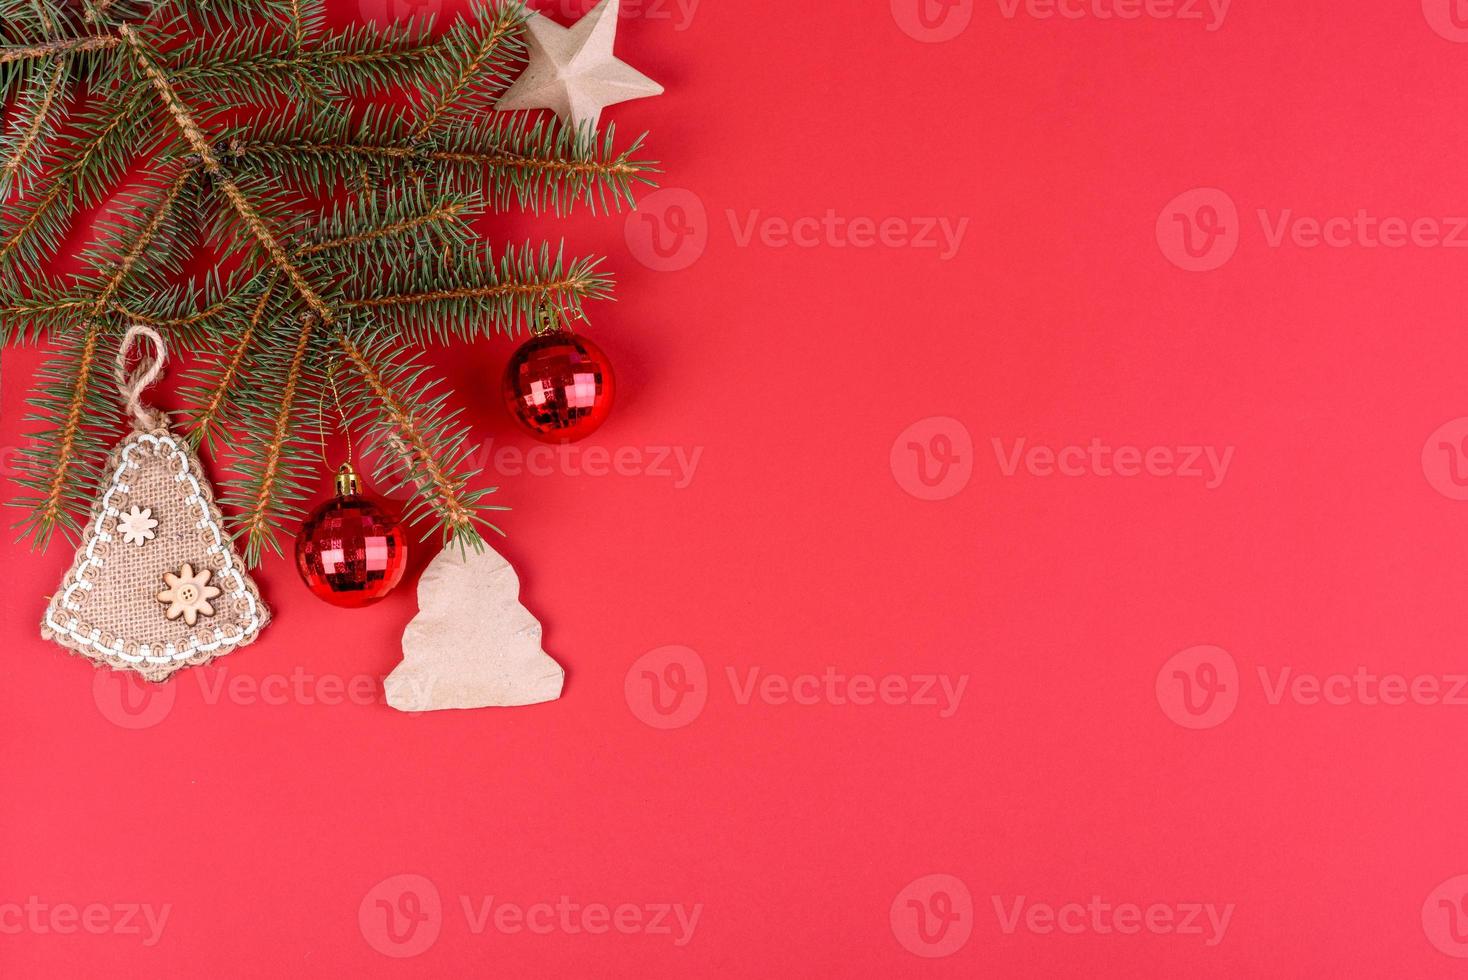 Christmas red decorations, fir tree branches on red background photo